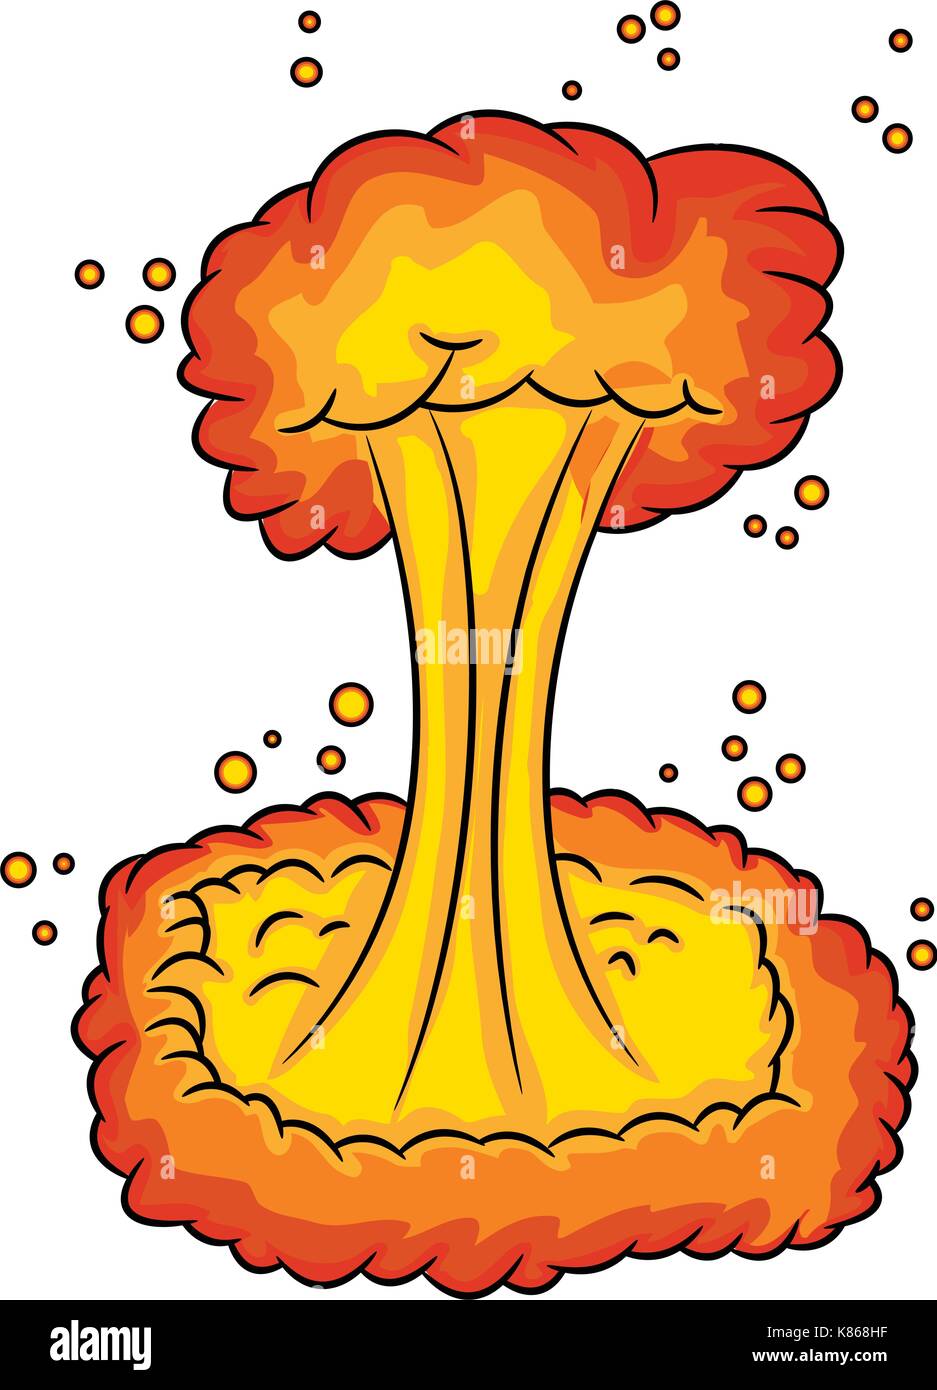 mushroom cloud, nuclear explosion,  vector symbol icon design. Beautiful illustration isolated on white background Stock Vector